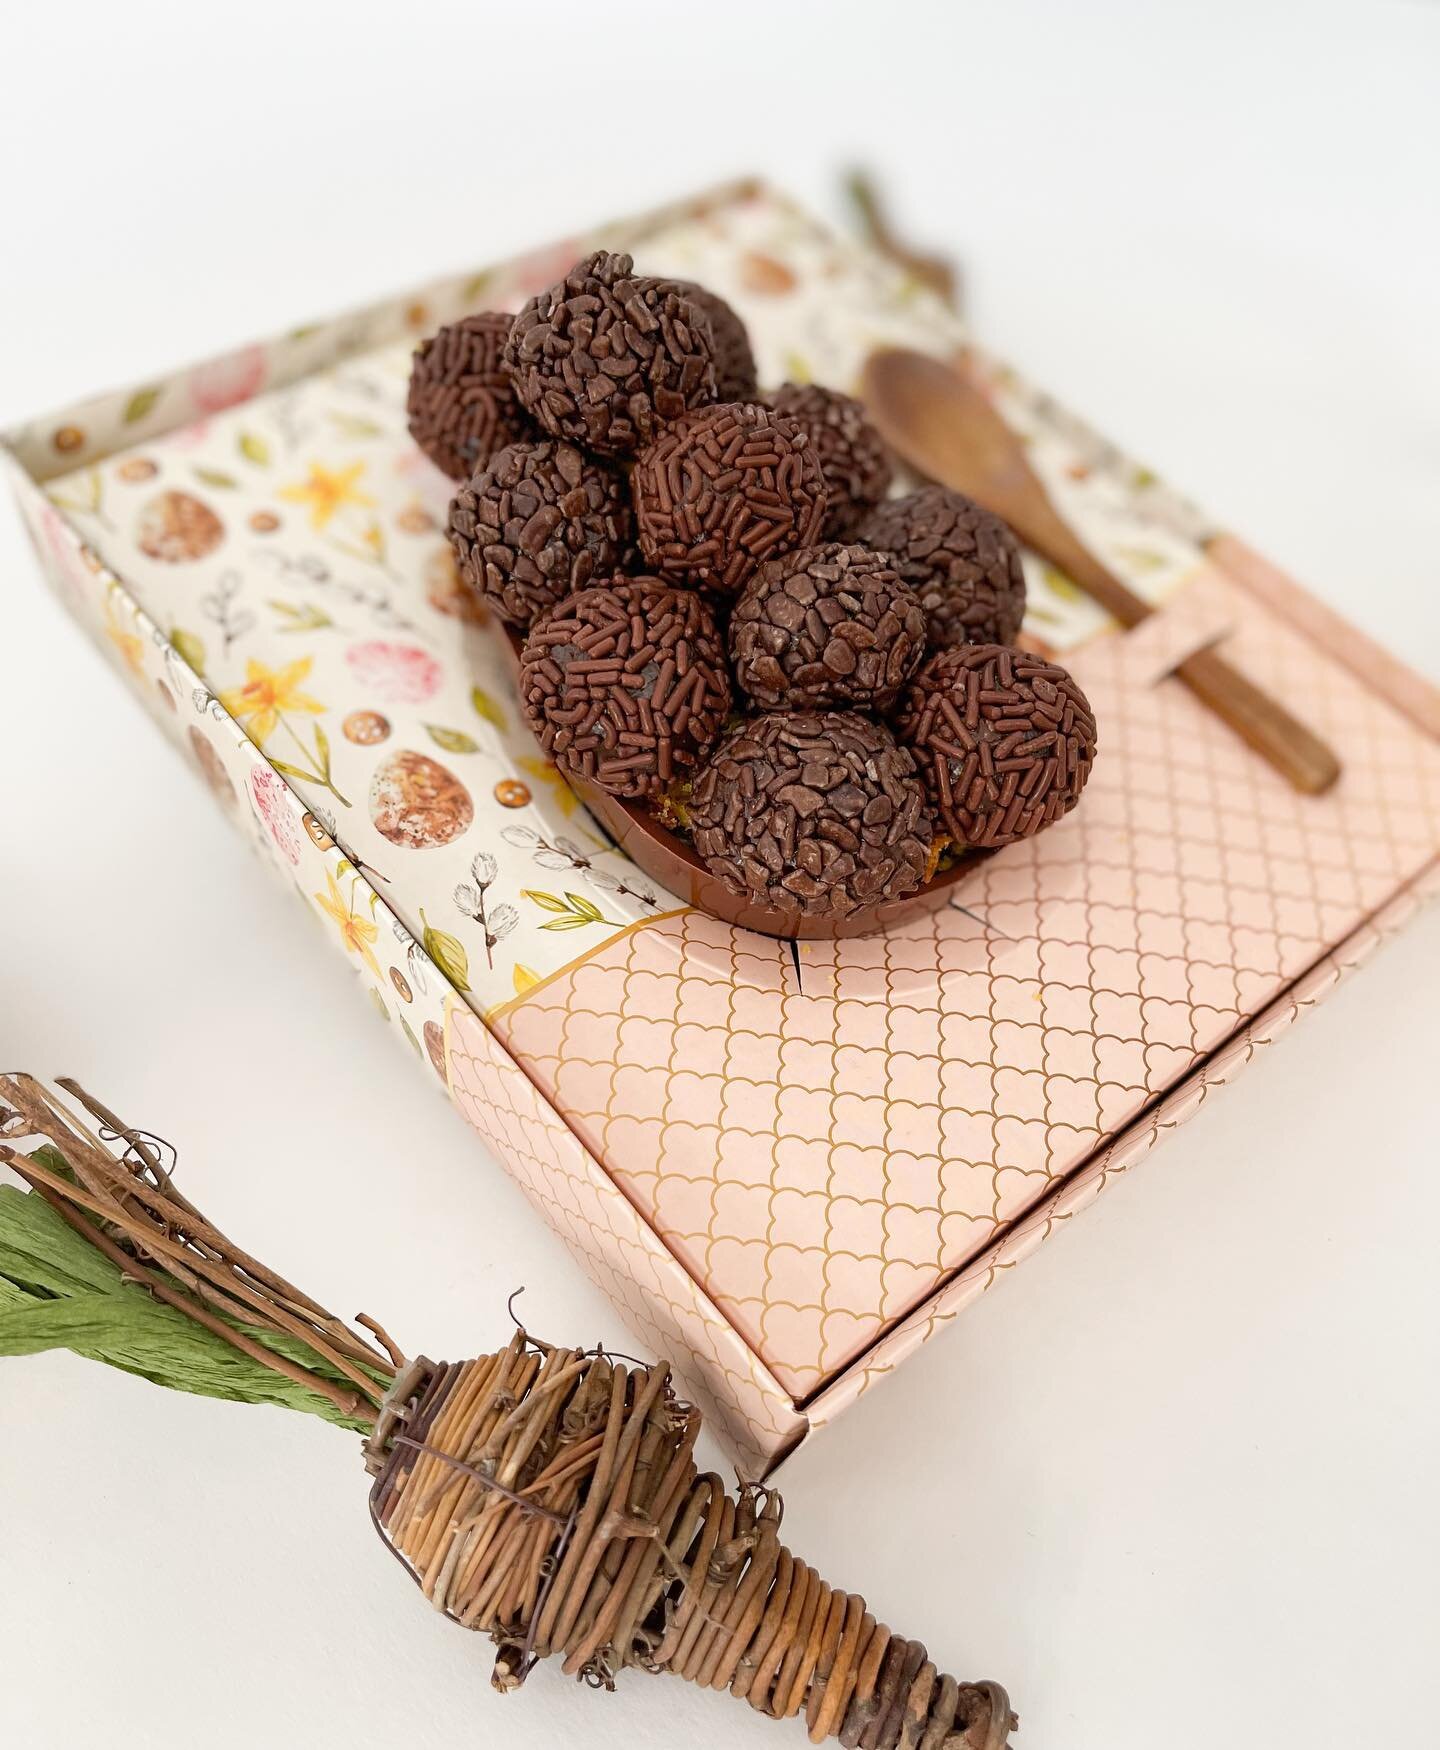 Another spoonable egg option for that special someone for Easter!This one has carrot cake and gourmet chocolate brigadeiro creme! #ovodecolher #spoonableeggs #easter #gourmetbrigadeiros #carrotcake